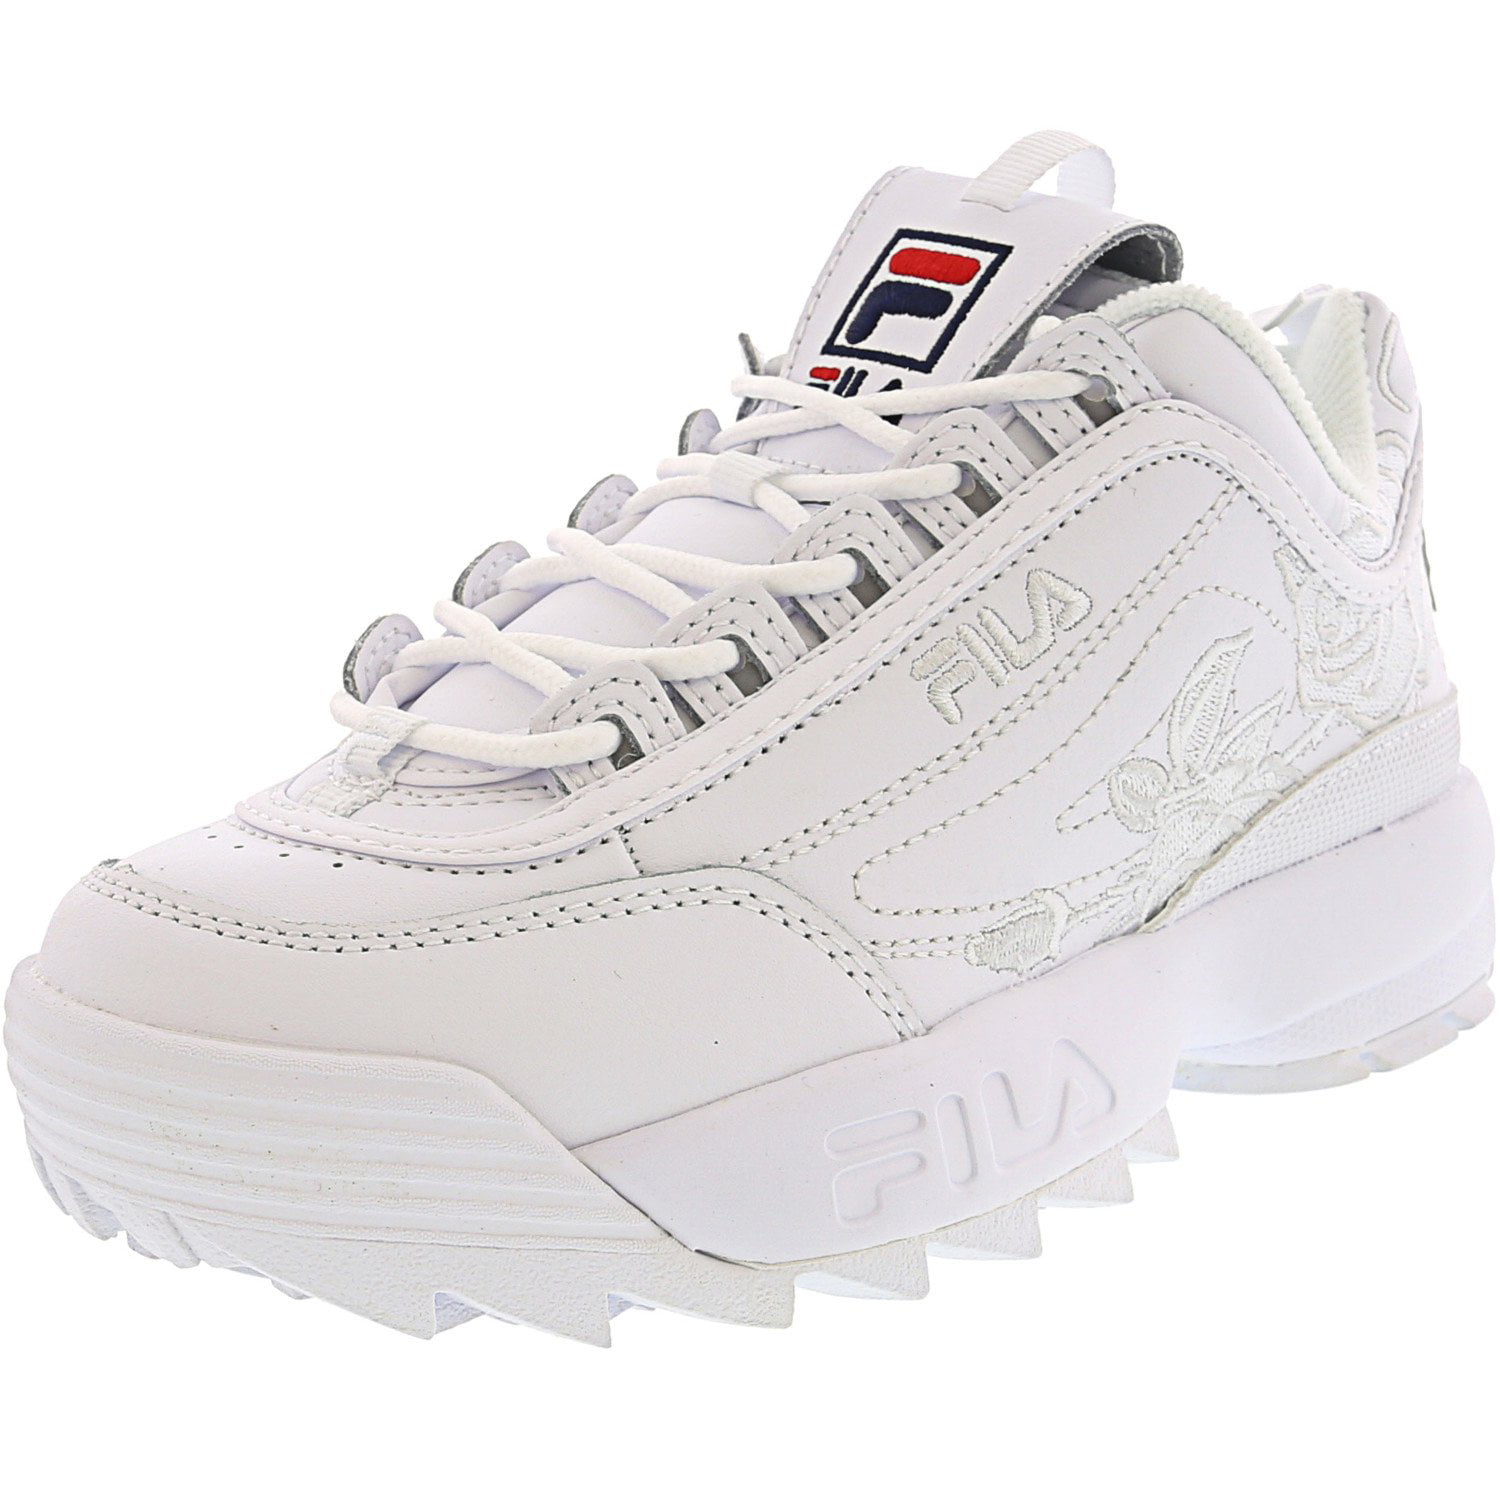 fila white high ankle shoes